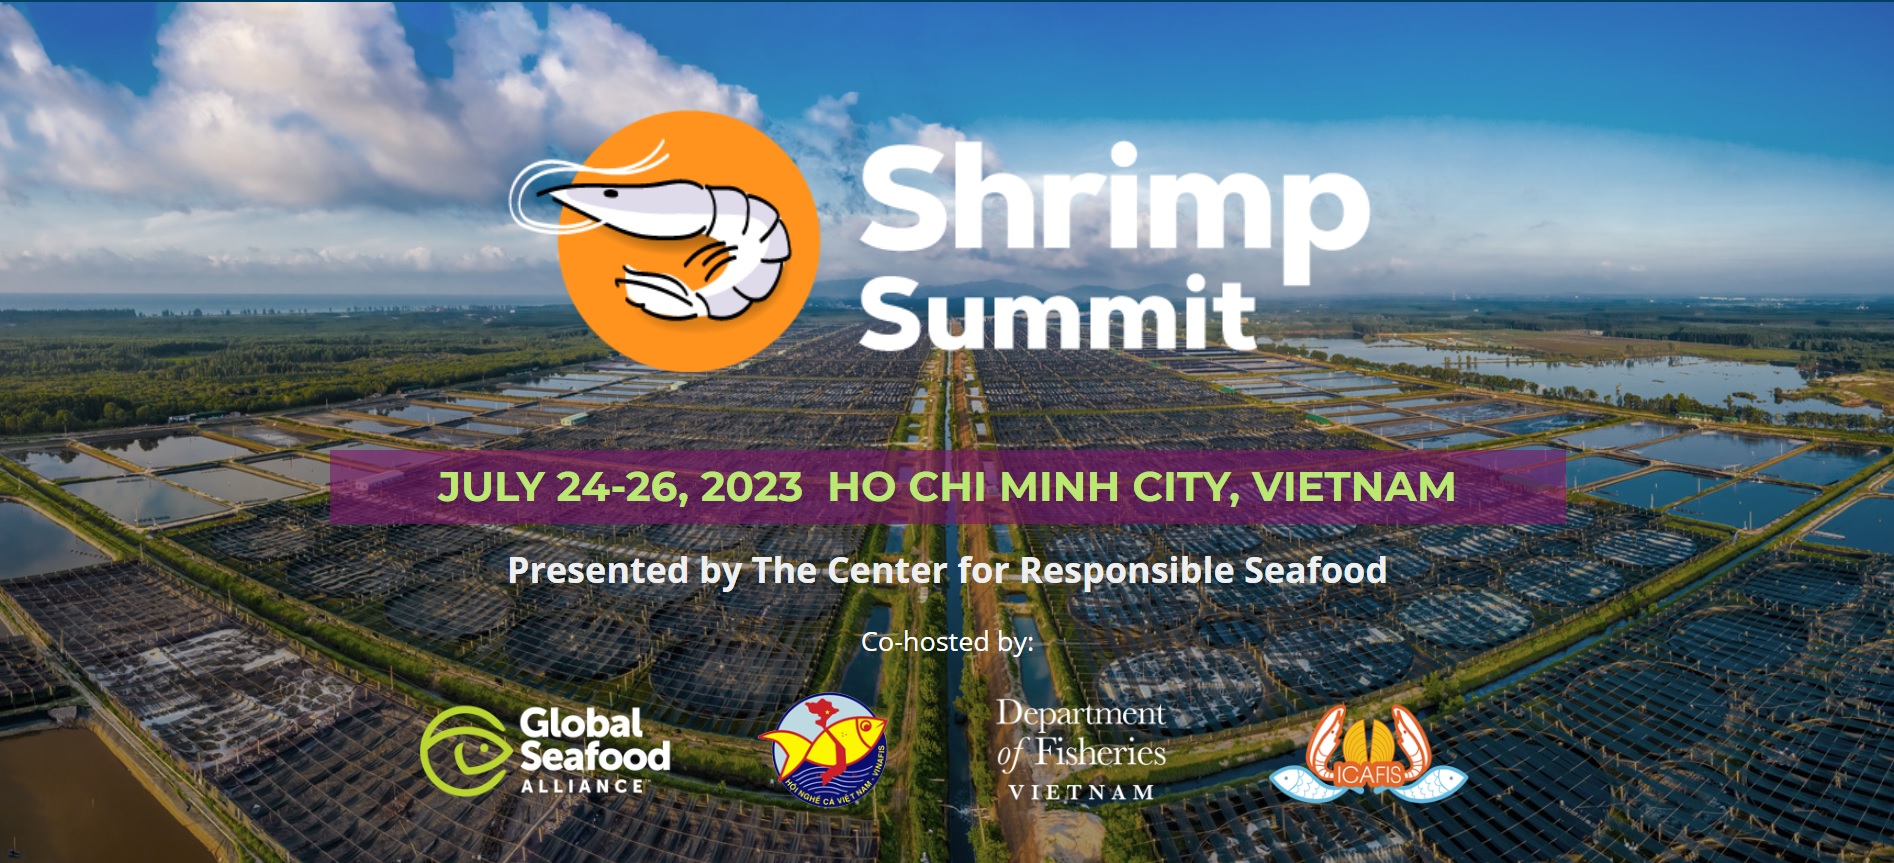 Shrimp Summit website front page picture. The background is an overhead view of chequered shrimp farms with a central drainage channel. Overlaying the picture is the Shrimp Summit logo - a white shrimp on an orange circle, and the words "Shrimp Summit, July 24-26 2023, Ho Chi Minh City, Vietnam. Hosted by The Center for Responsible Seafood" and "Co-hosted by Global Seafood Alliance, VINAFIS, Department for Fisheries Vietnam, ICAFIS"